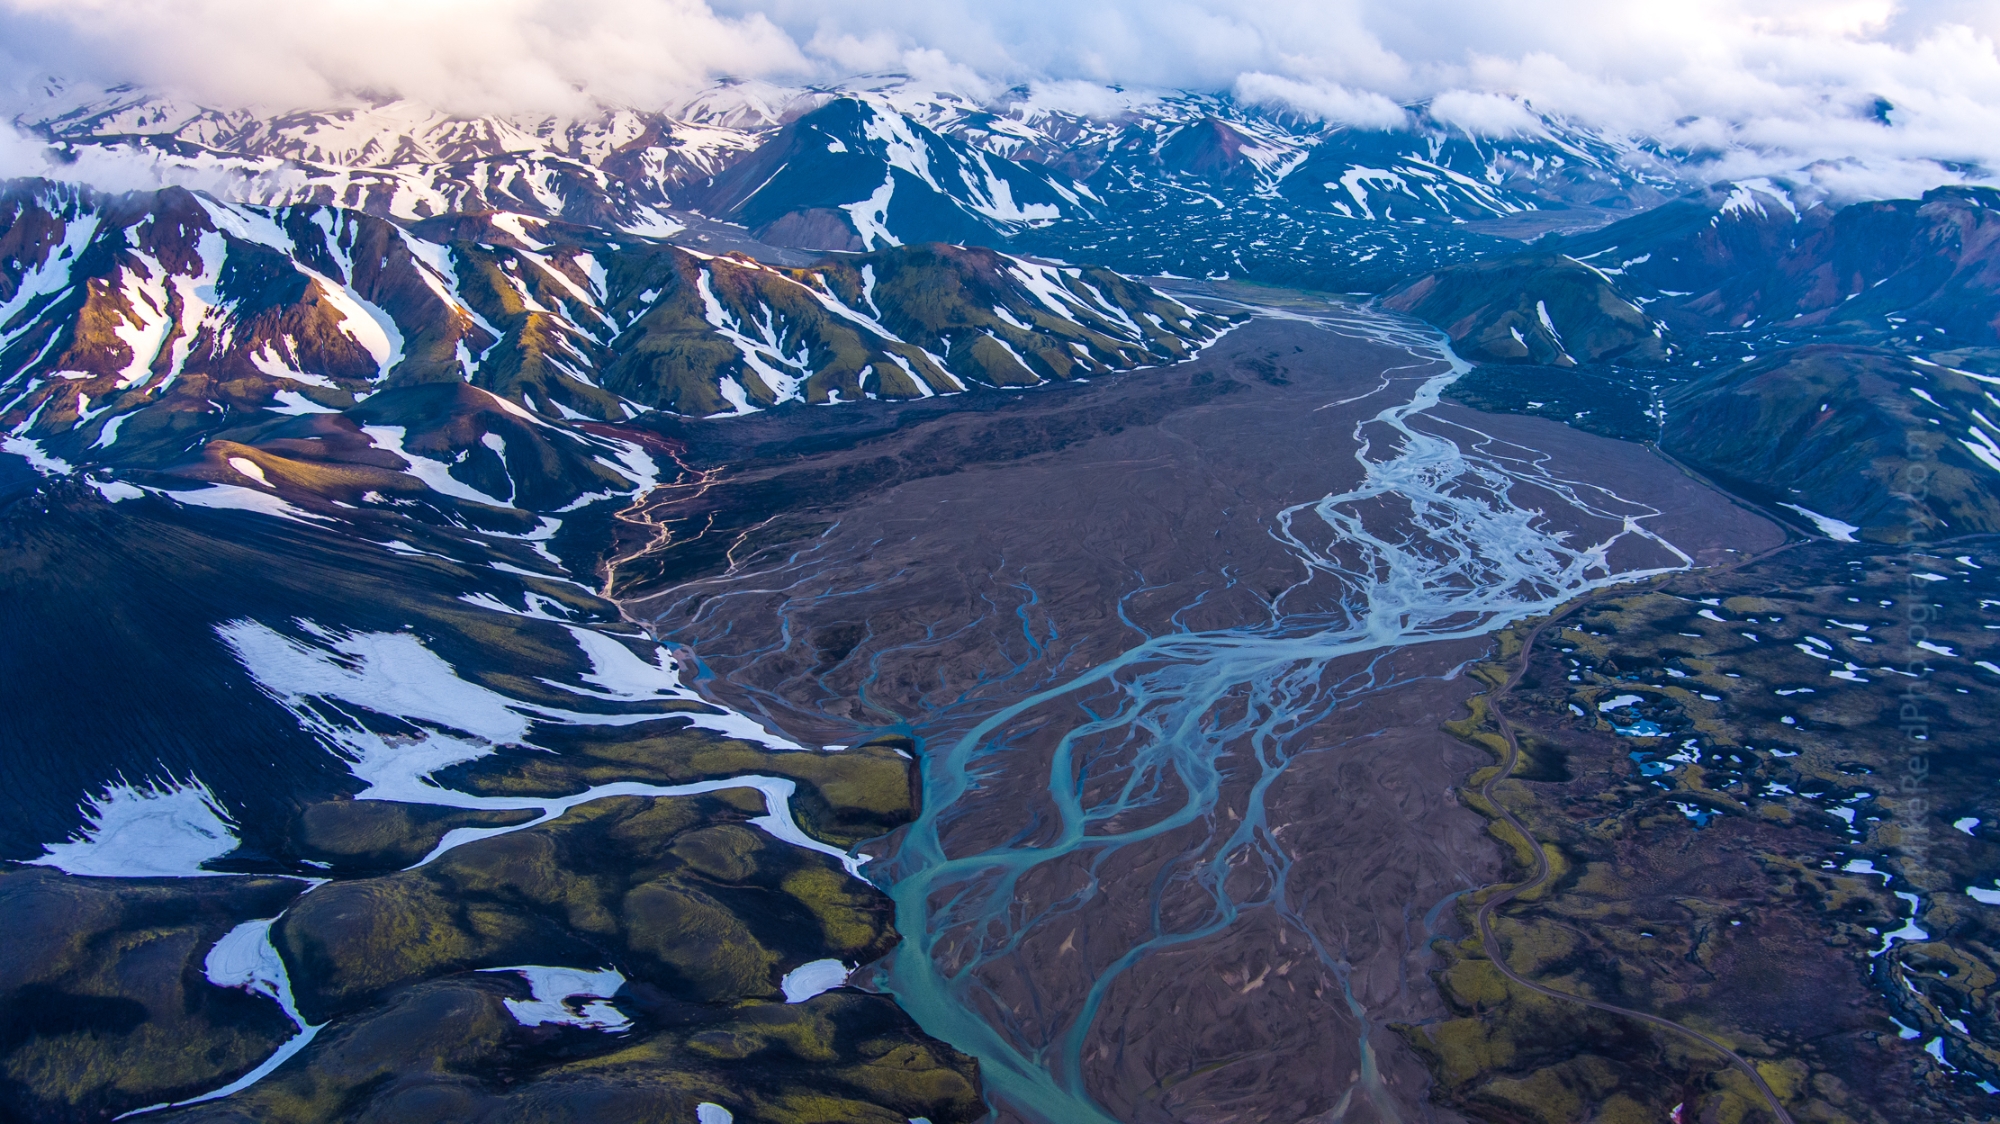 Over Iceland Drone Rivers into the HIghlands.jpg 